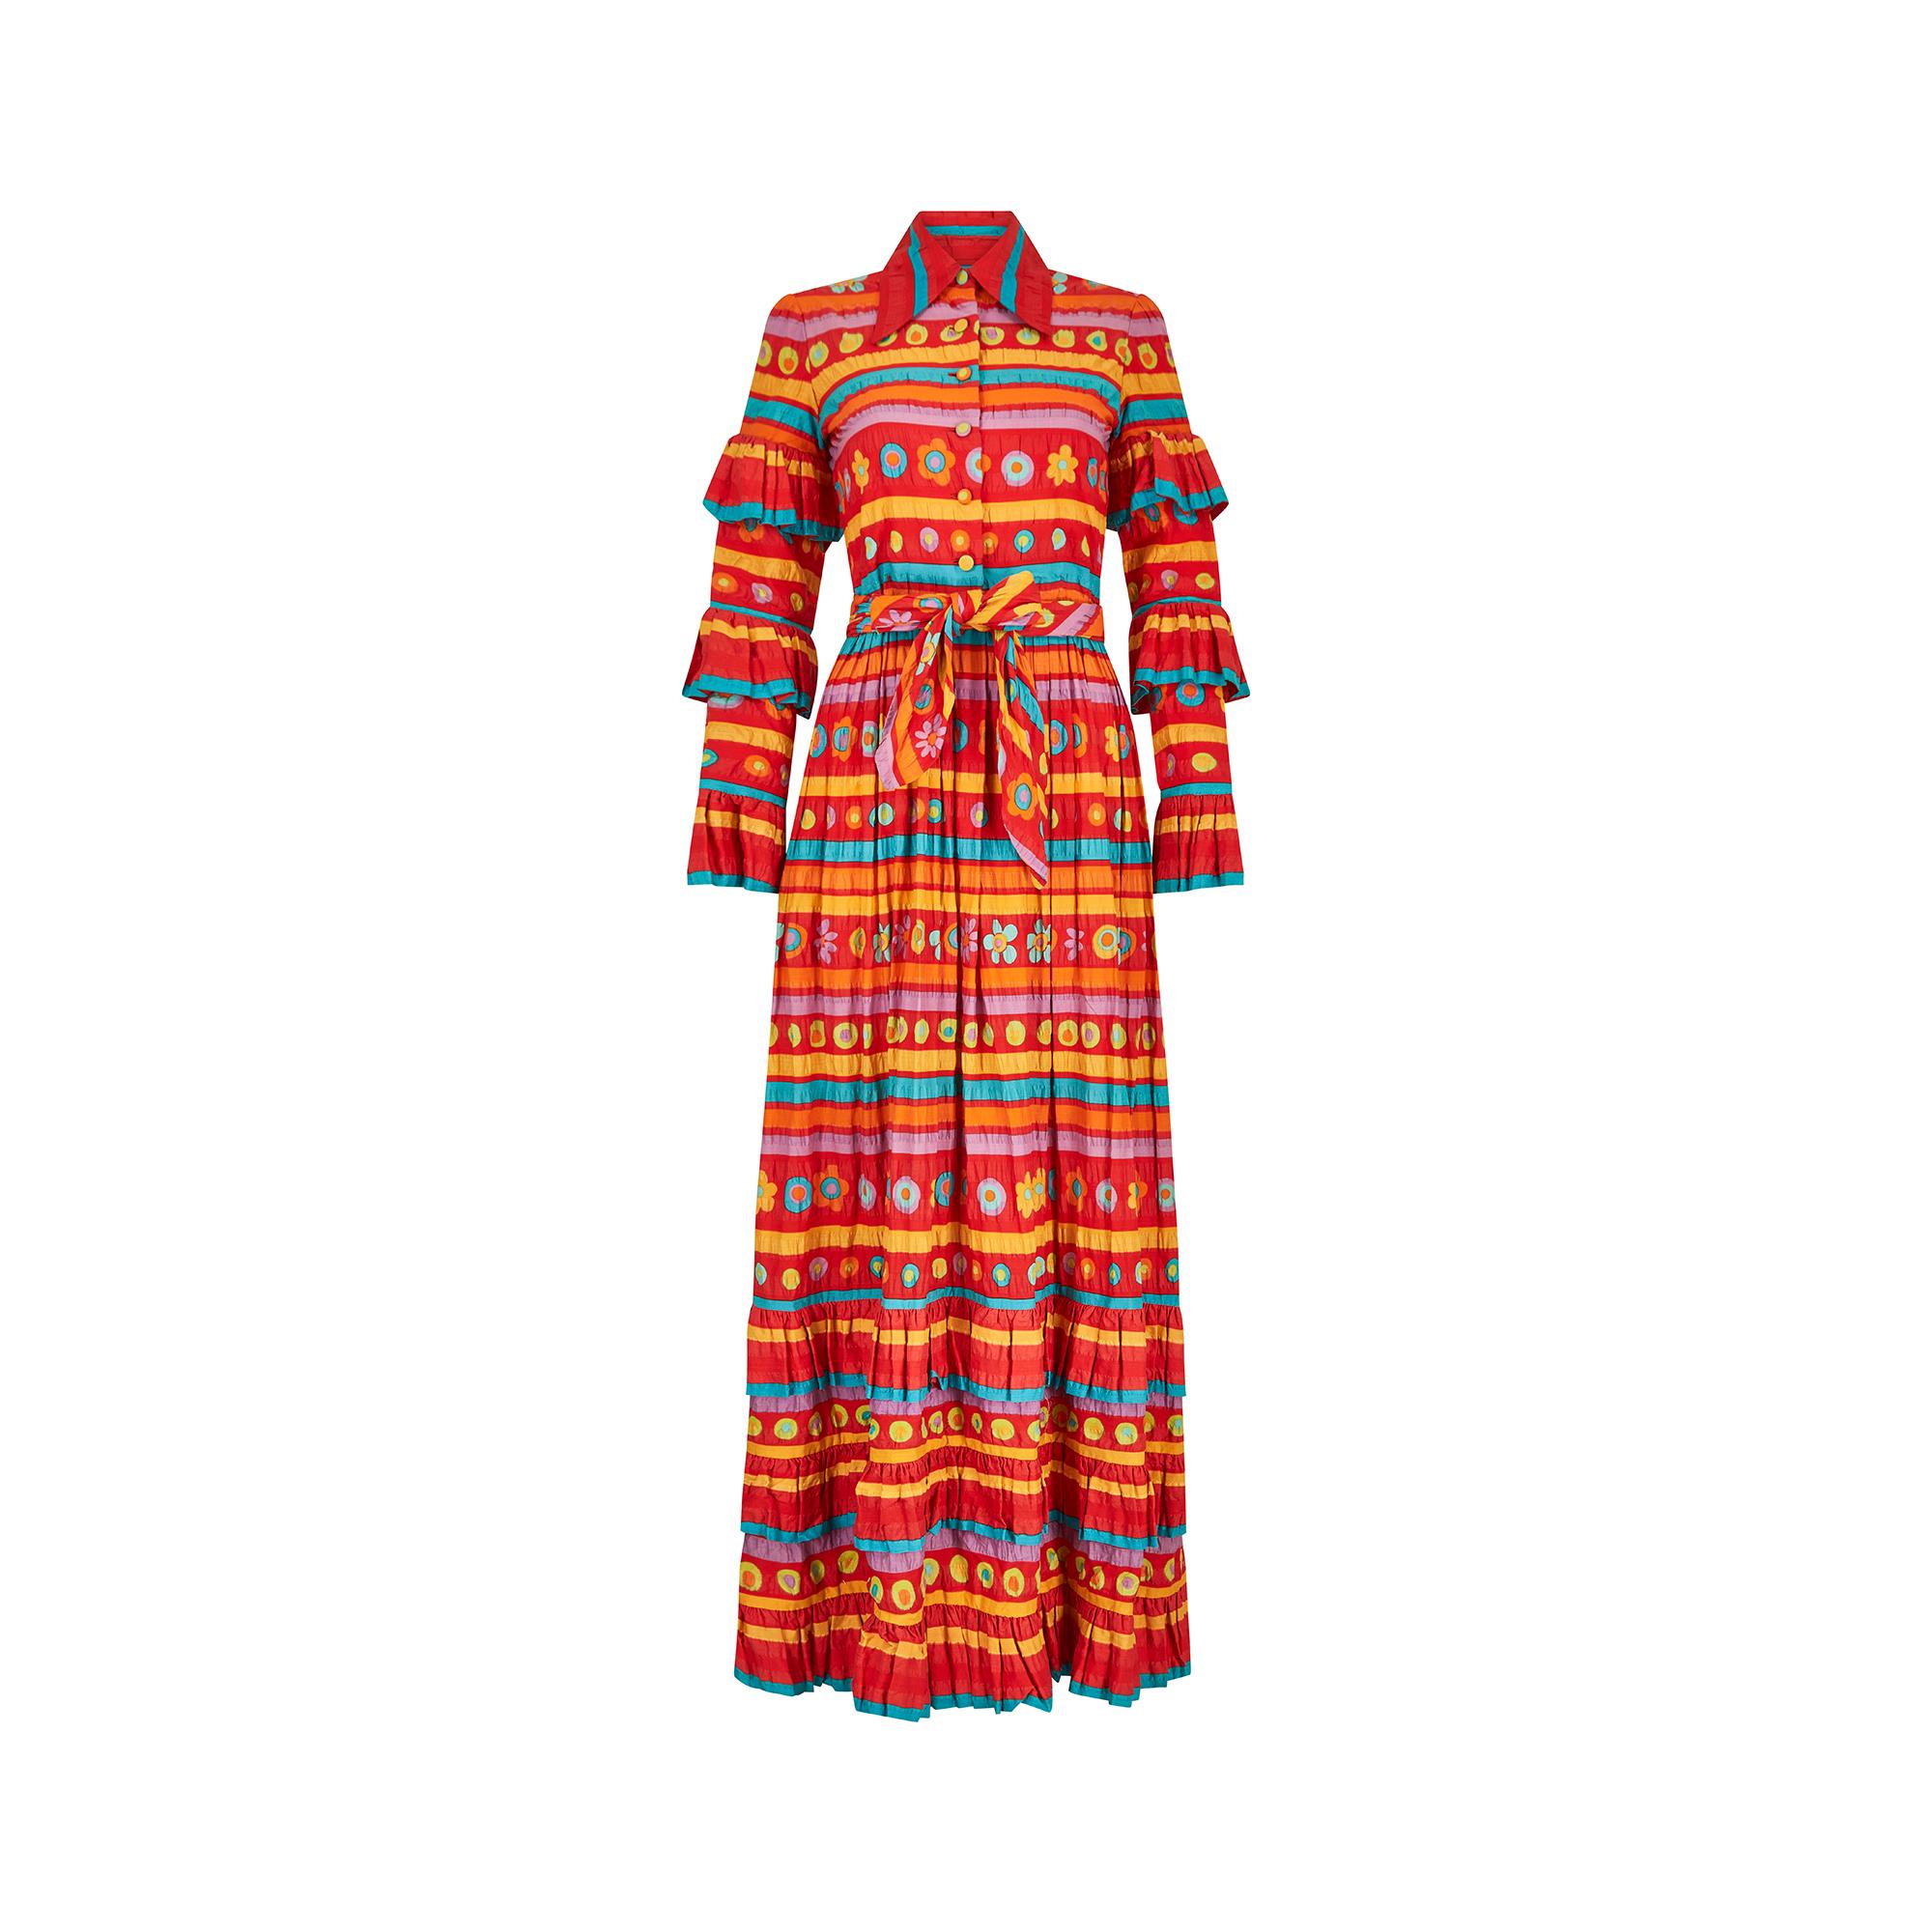 This is a really fun 1970s maxi print that reminds me of a fiesta dress.  It has brightly coloured coordinating stripes interspersed with a roundel and floral arrangement in red, turquoise, orange, purple, yellow and green.  The unusual material is